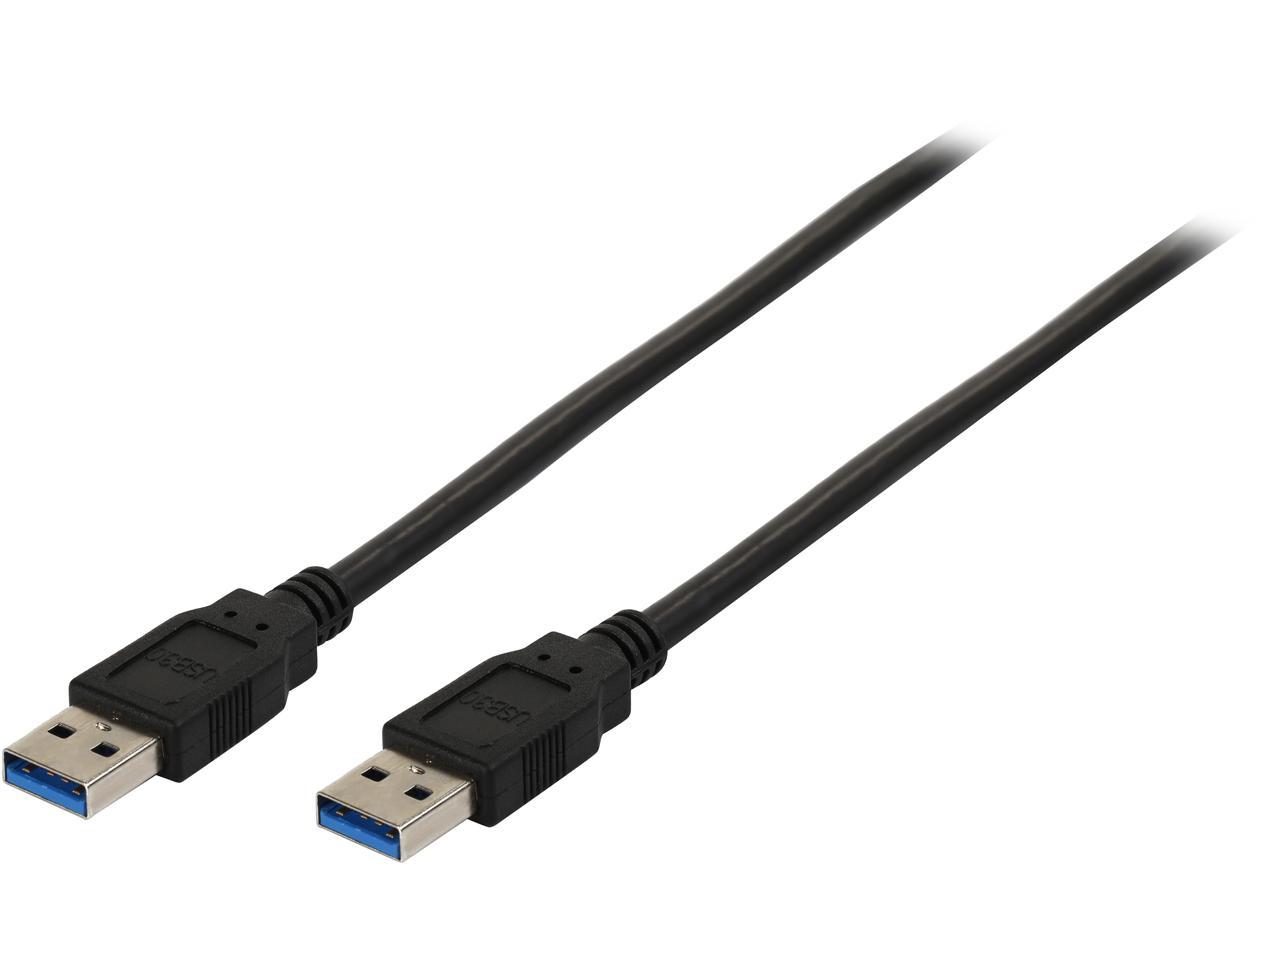 StarTech.com USB3SAA6BK Black Black SuperSpeed USB 3.0 Cable A to A - M/M